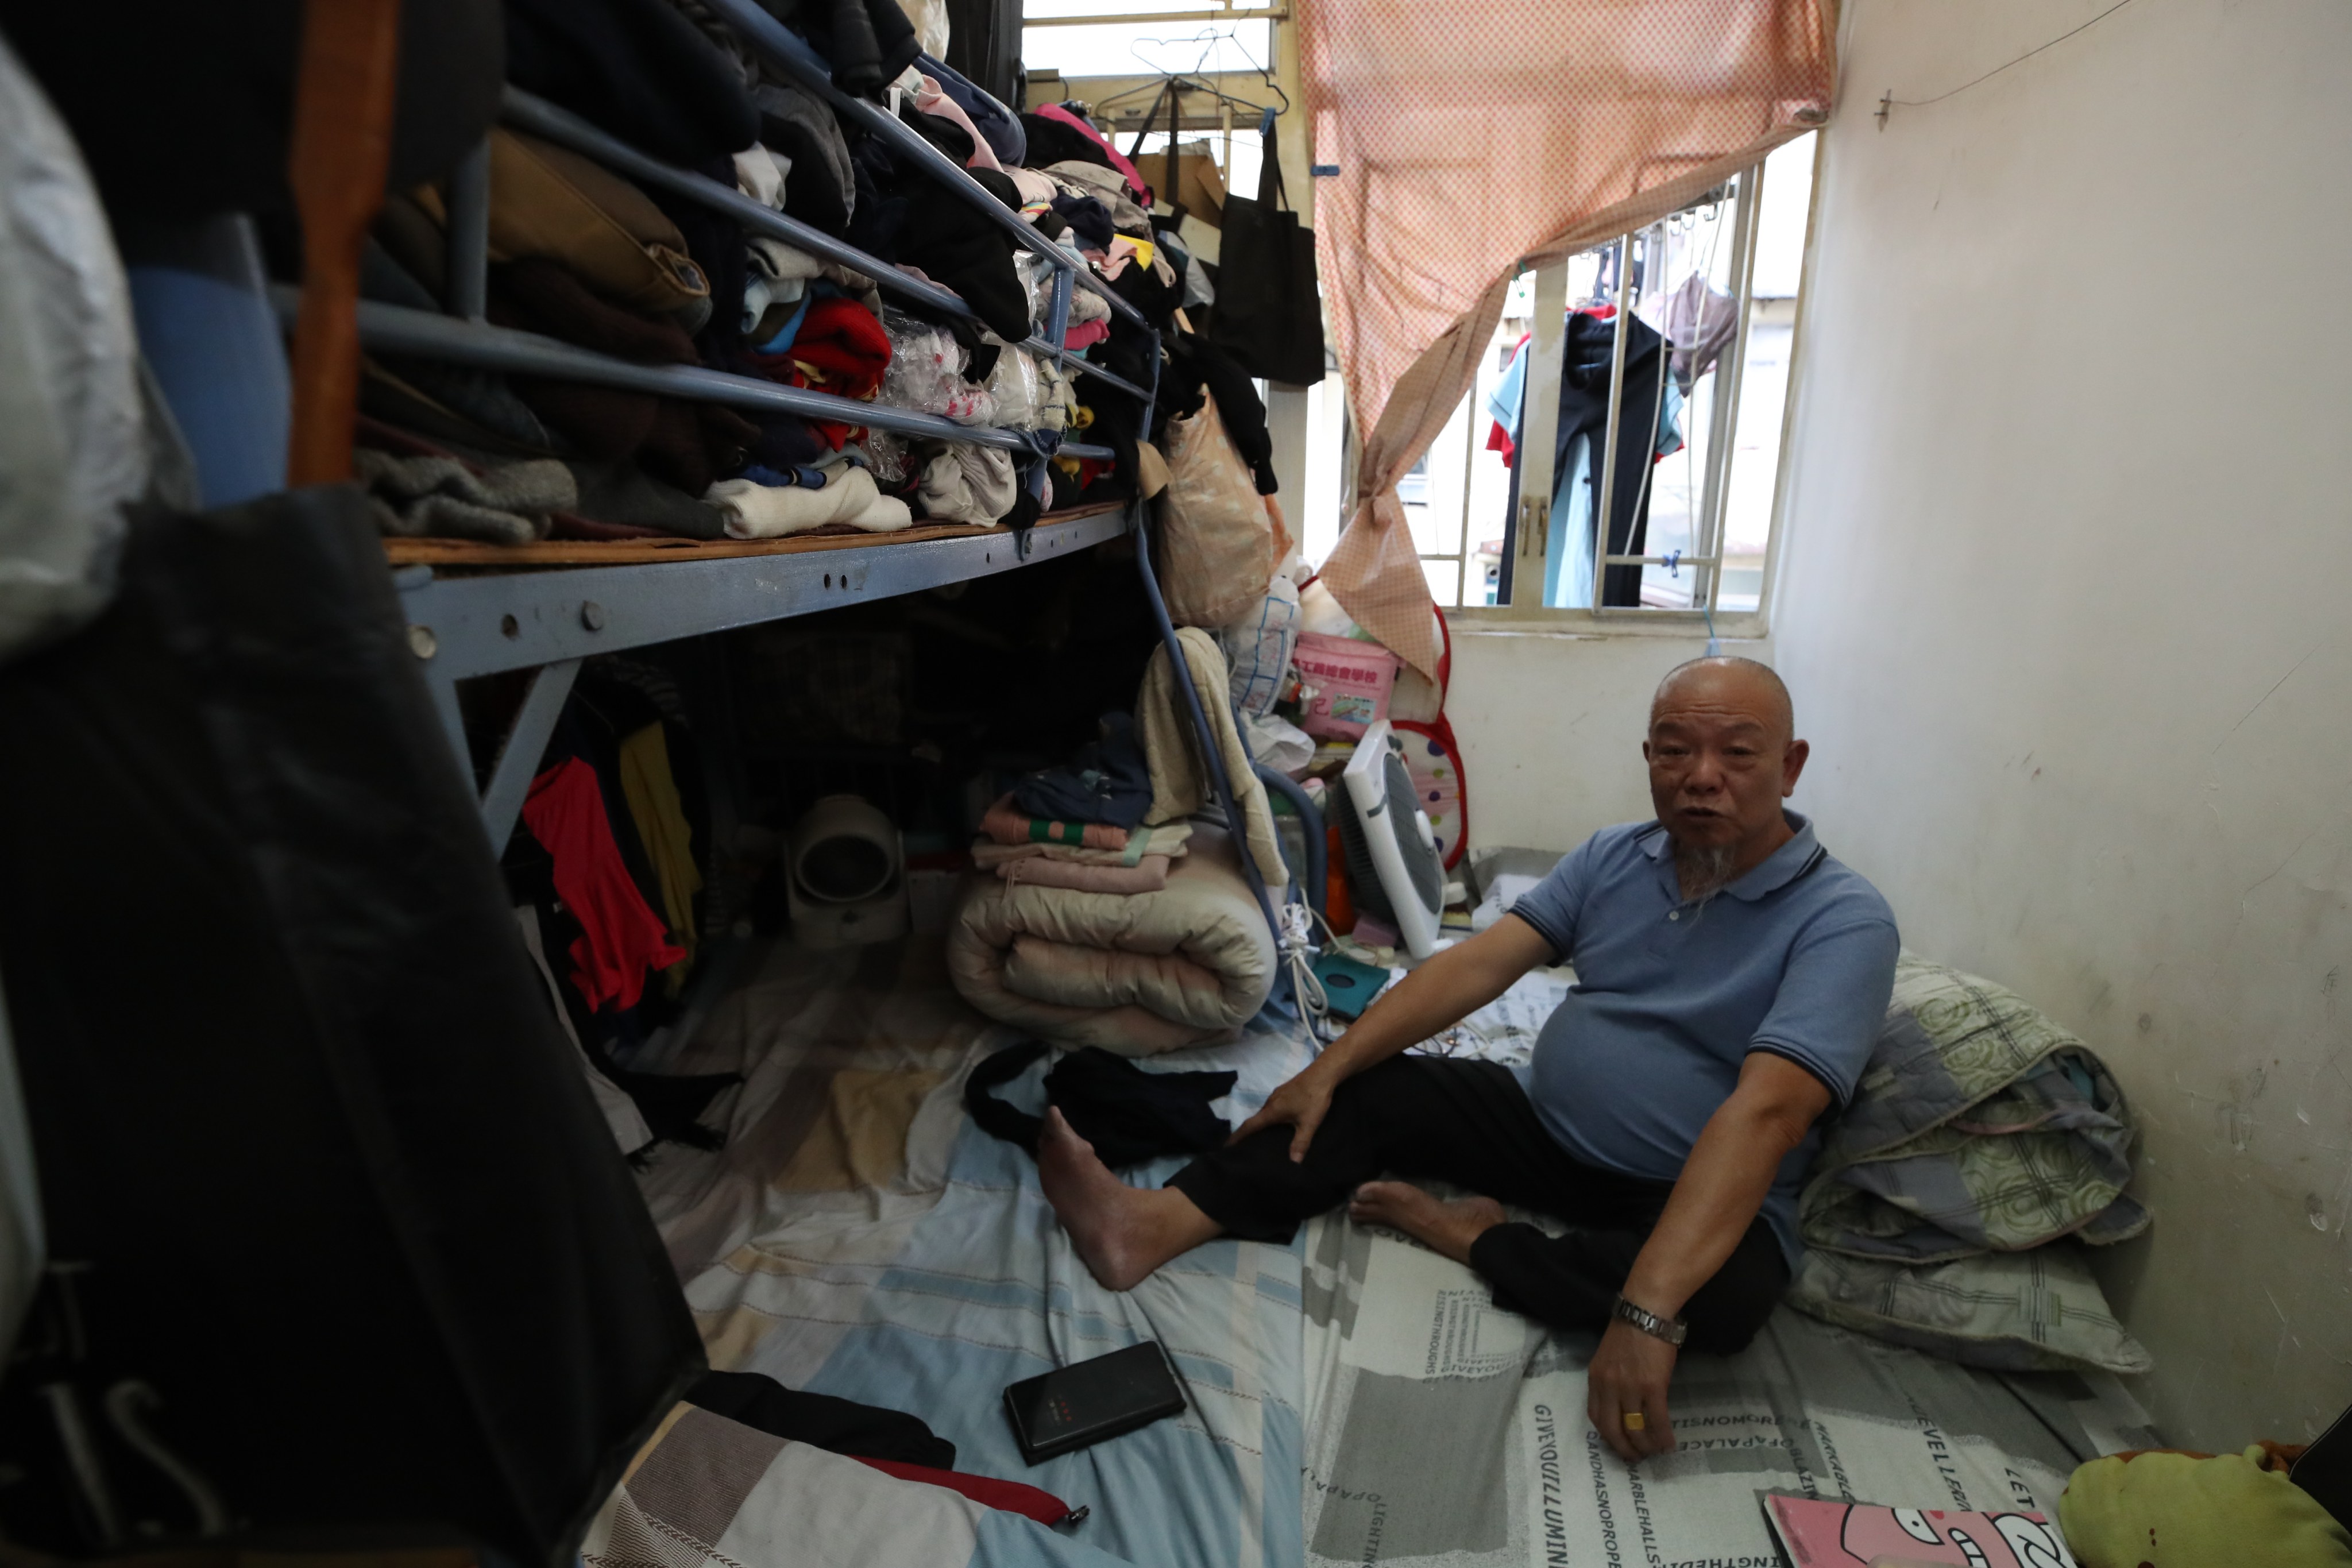 Chan Chuen-bui in the subdivided flat that is home to him, his wife and daughter. Photo: Edmond So